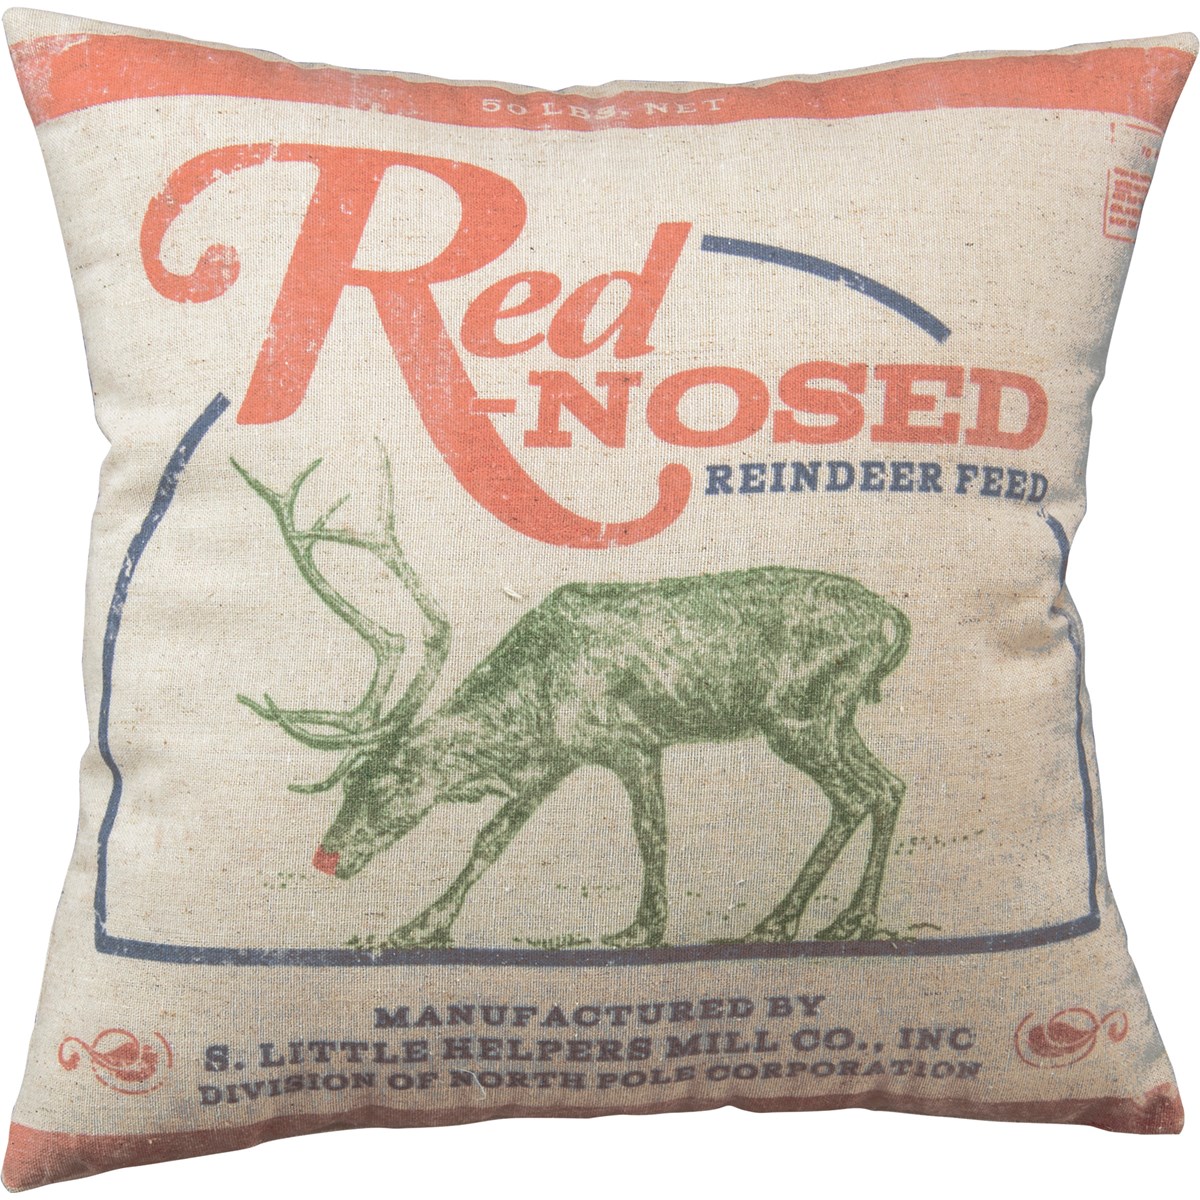 Red Nosed Pillow - Cotton, Linen